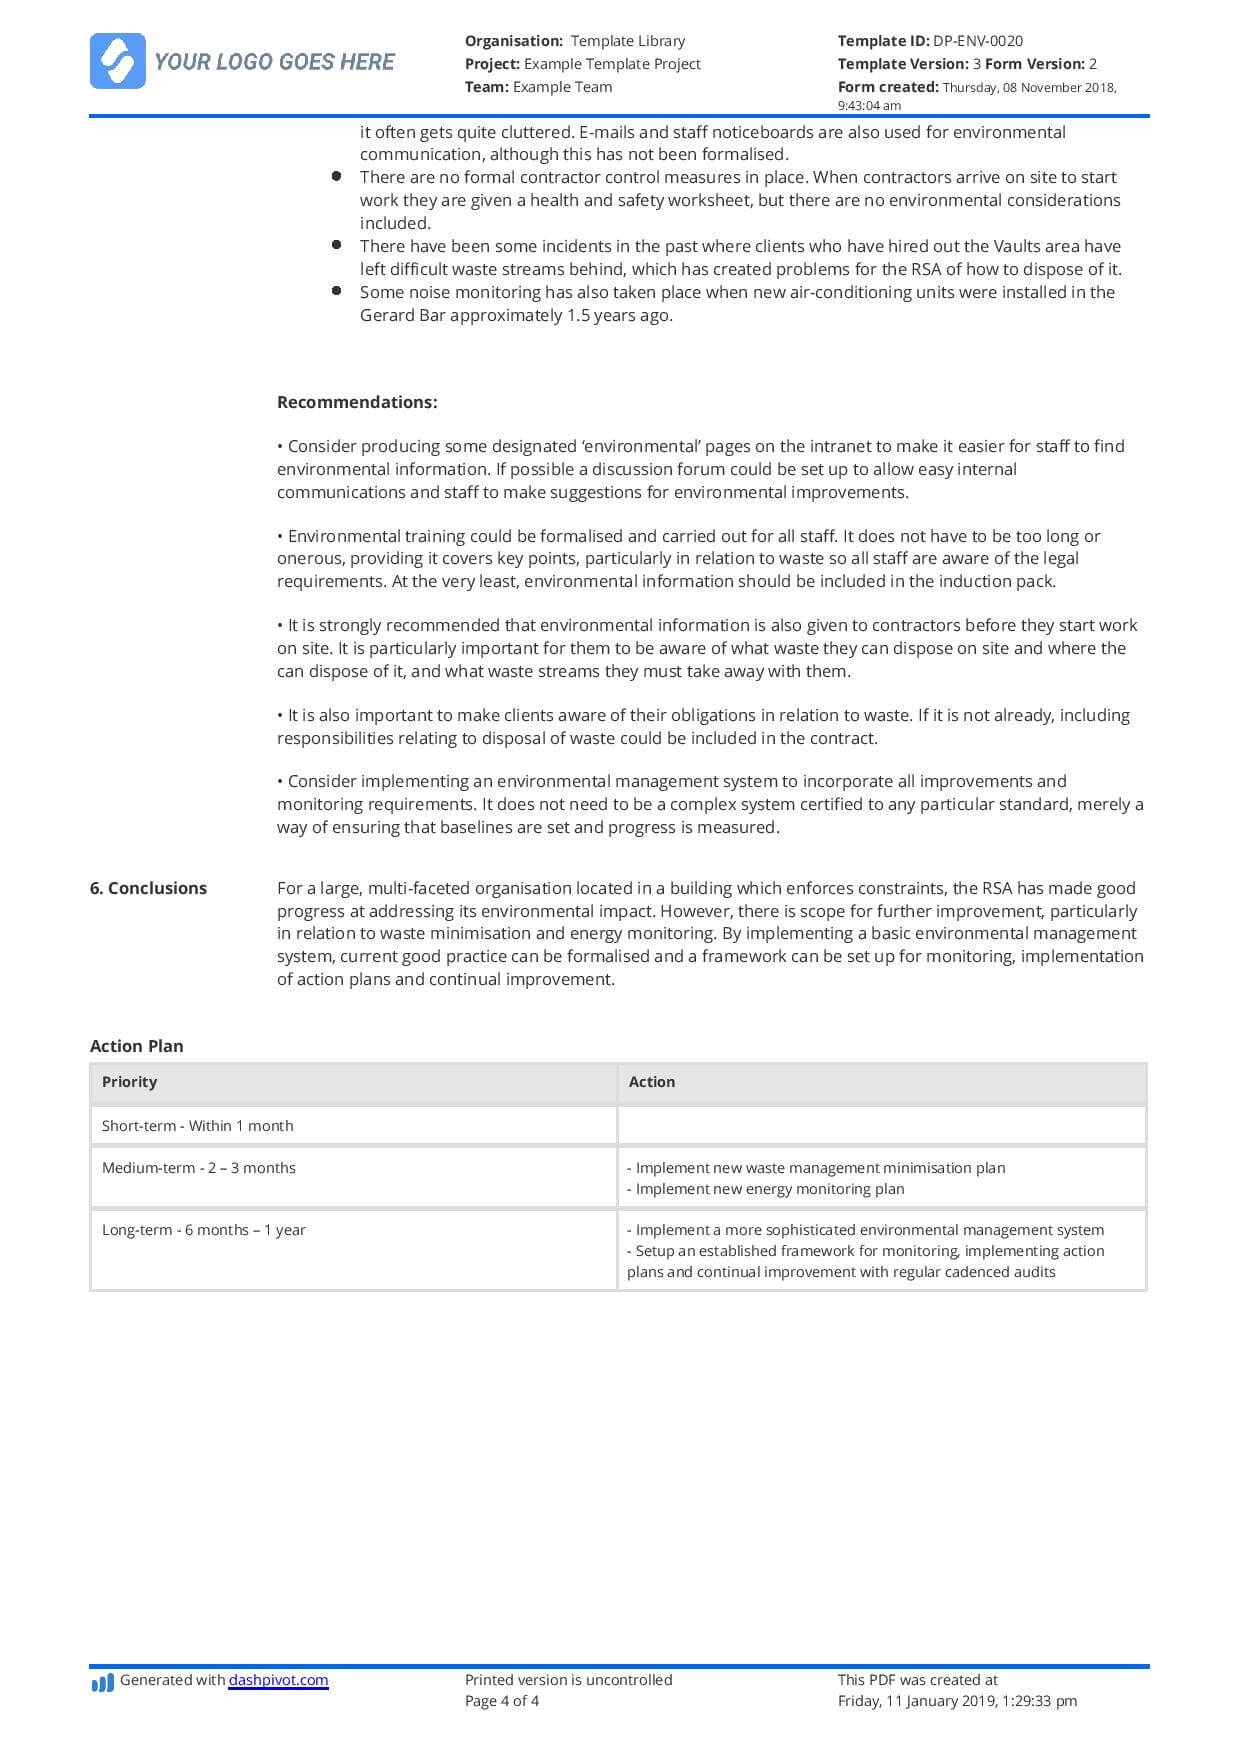 Construction Audit Report Sample: For Safety, Quality With Information System Audit Report Template